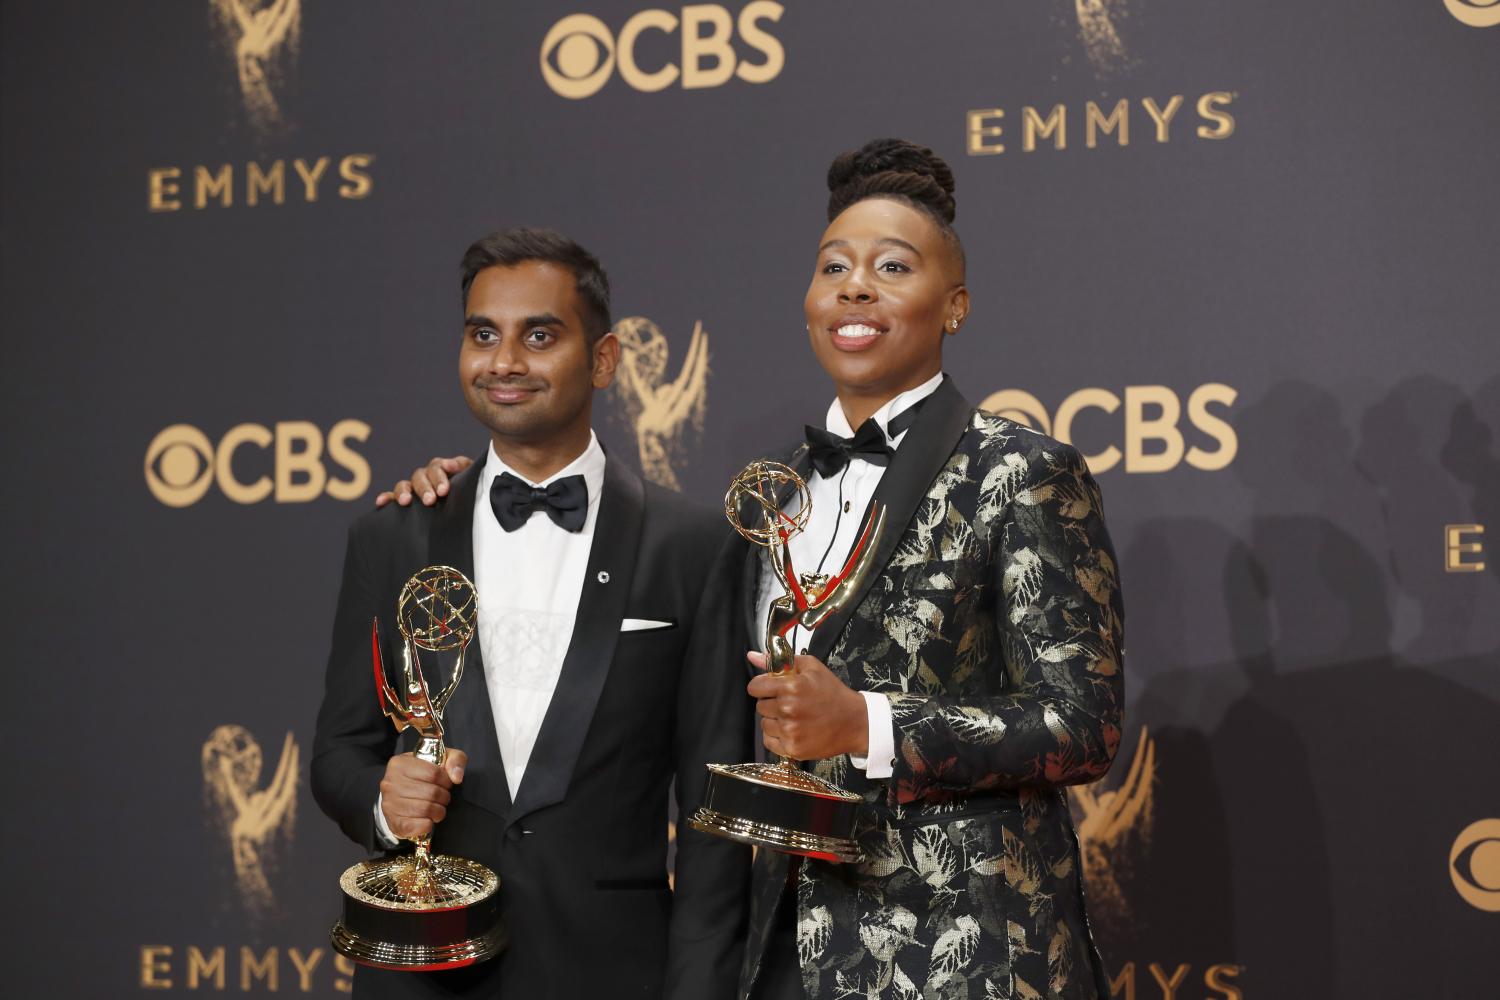 Among+all+the+Emmy+breakthrough+moments%2C+add+Riz+Ahmed%E2%80%99s+and+Aziz+Ansari%E2%80%99s+awards+for+shows+that+destroy+Muslim+stereotypes++%28PHOTO%29